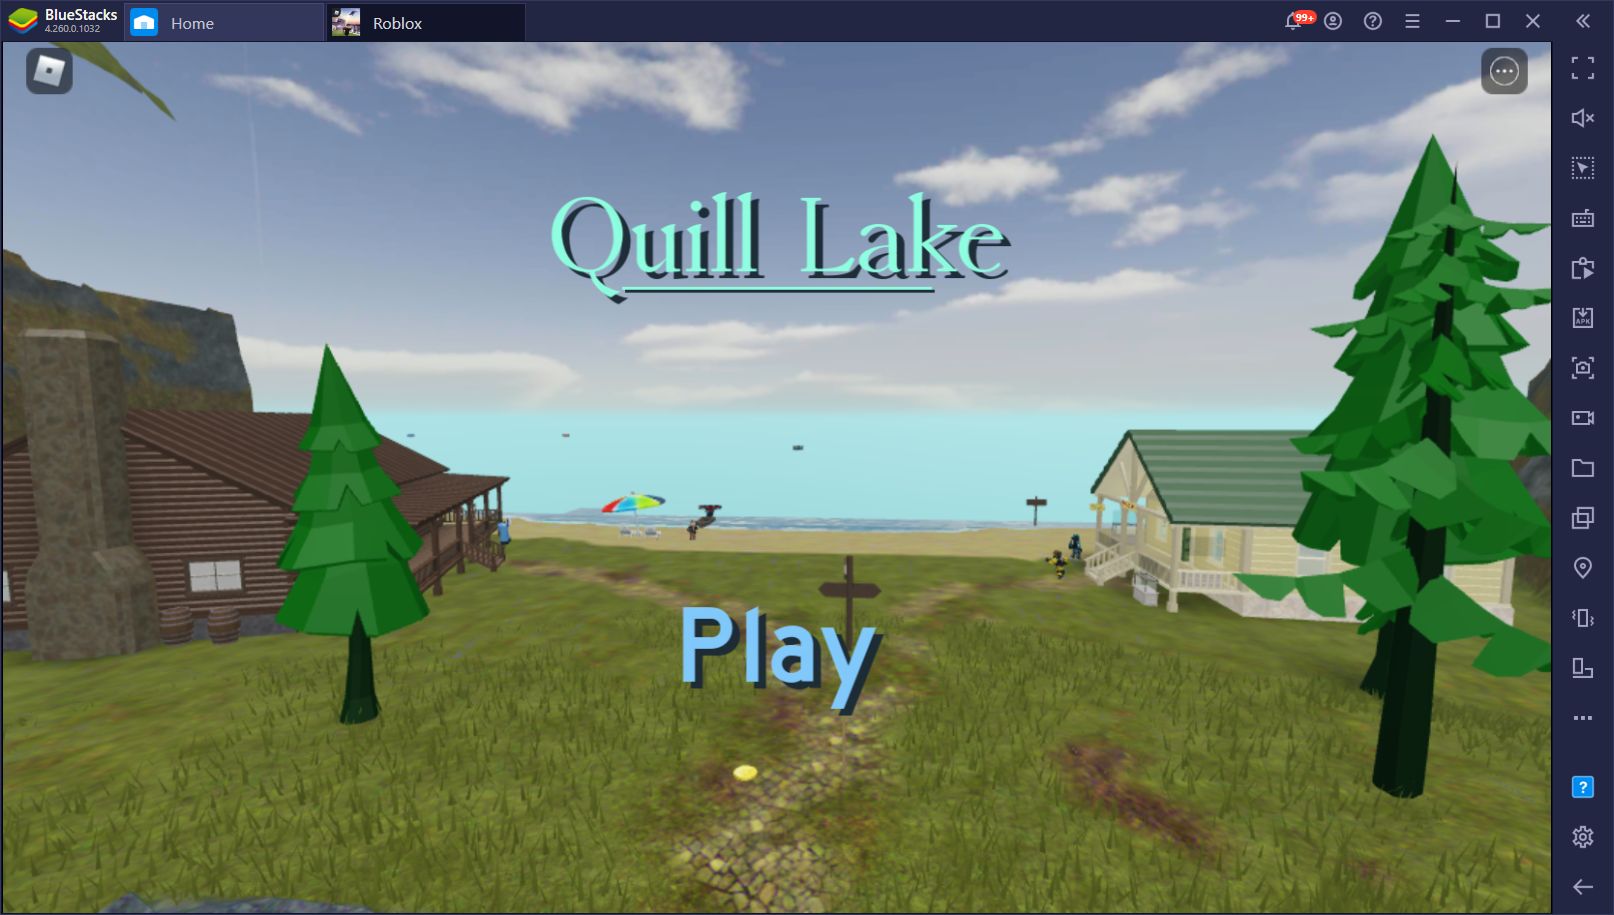 The Best Roblox Games To Play In 2021 Bluestacks - quill lake map roblox